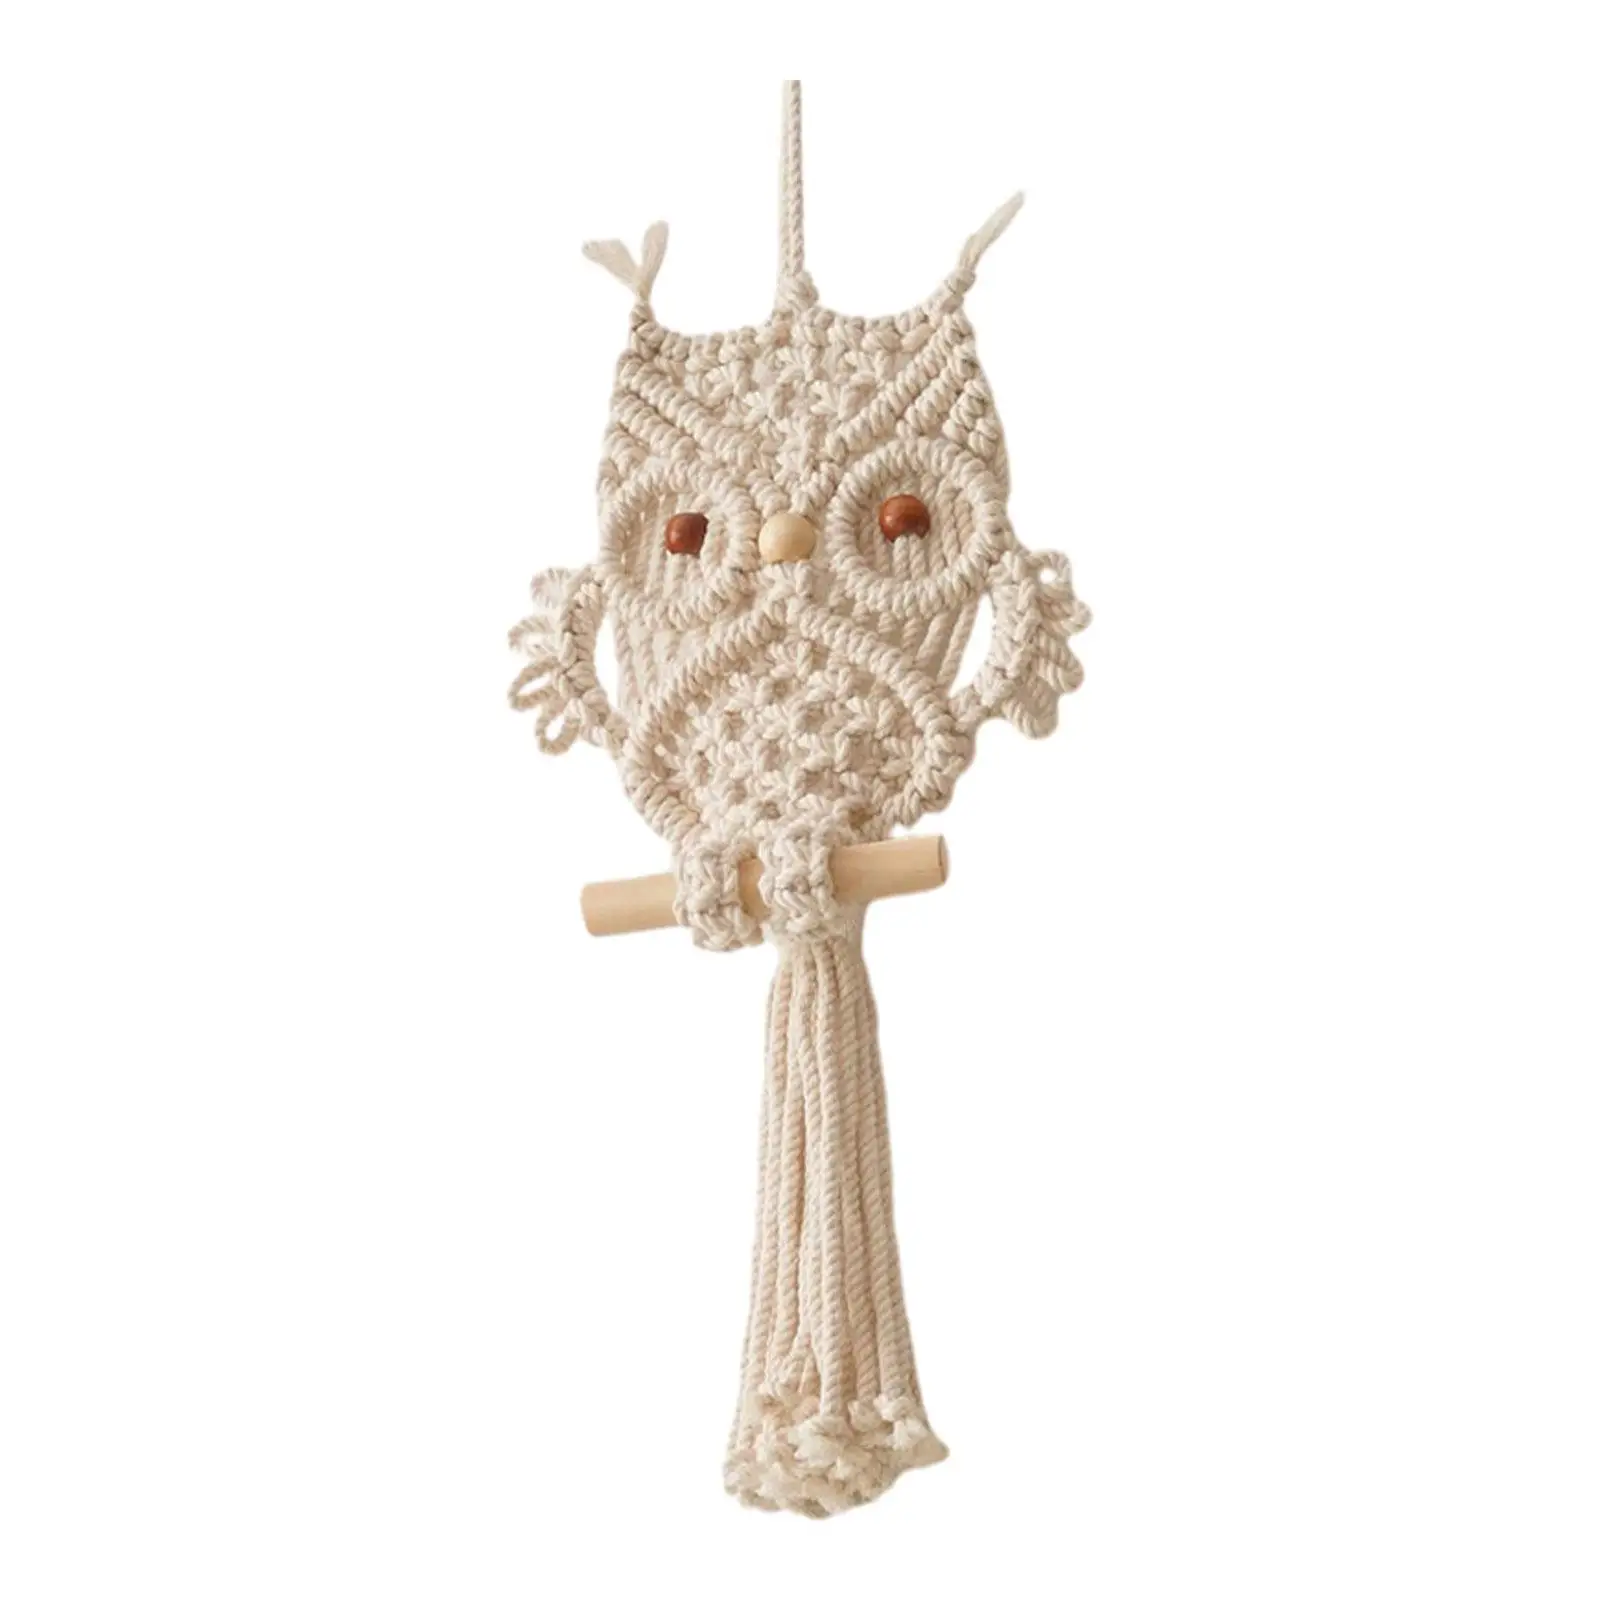 Owl Macrame Tapestry Wall Hanging Woven Bohemian Tapestry for Wedding Dorm